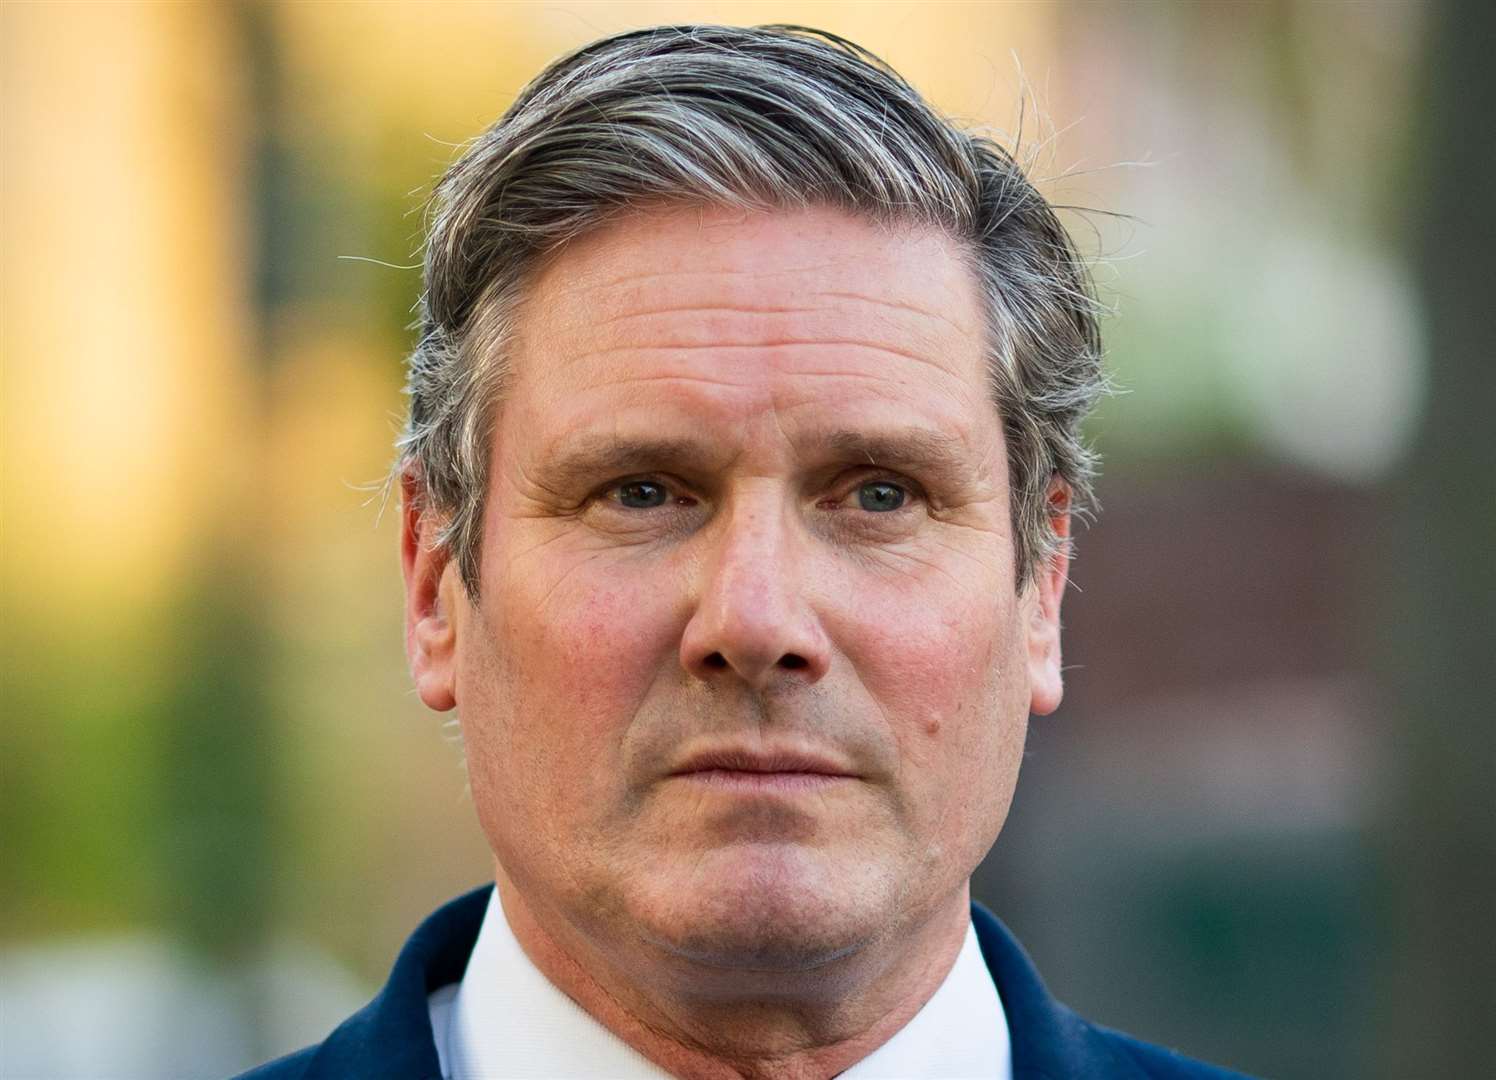 Labour leader Sir Keir Starmer was pressed by his party's MPs to back trade union calls to postpone the reopening of schools.